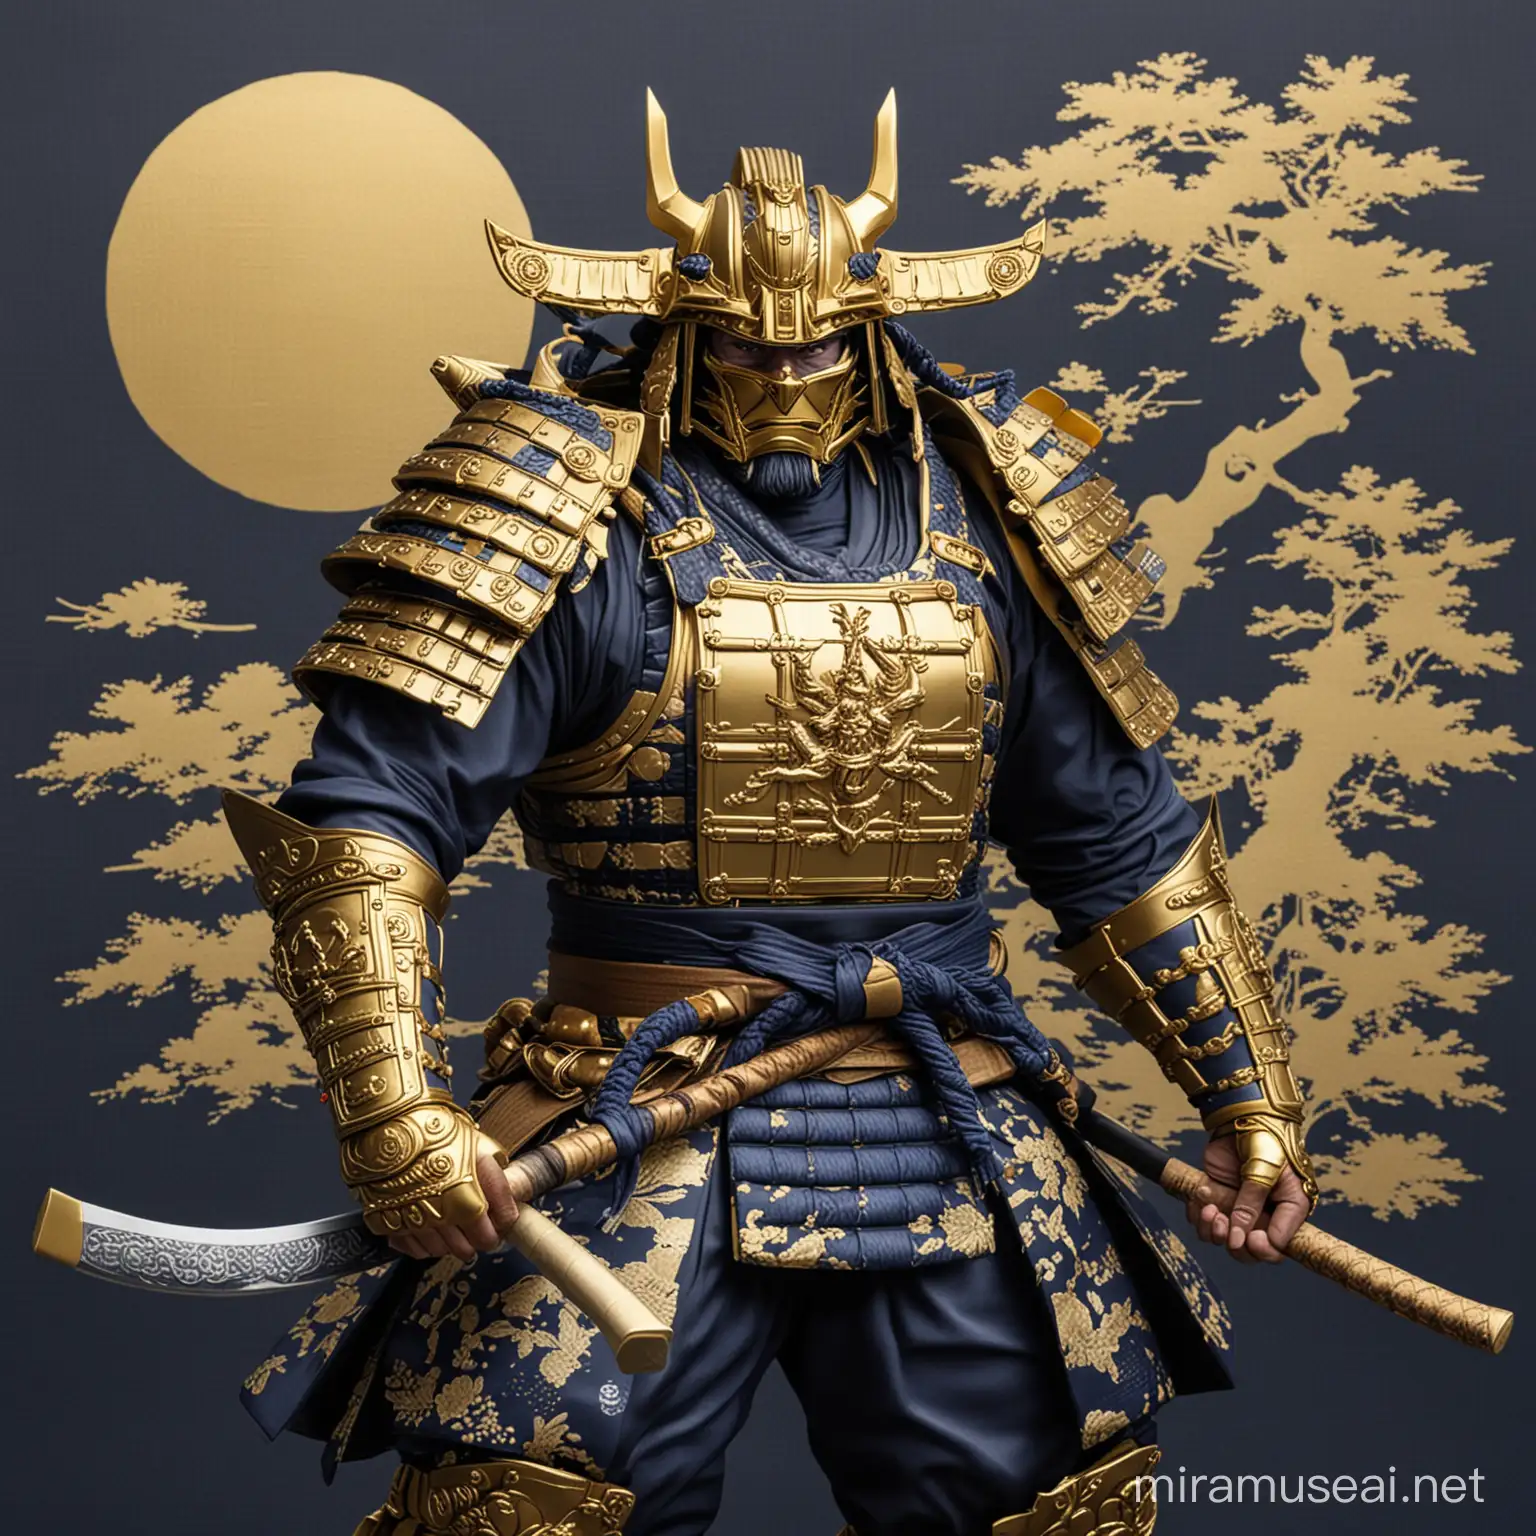 Samurai Shogun in Traditional Armor with Navy and Gold accents